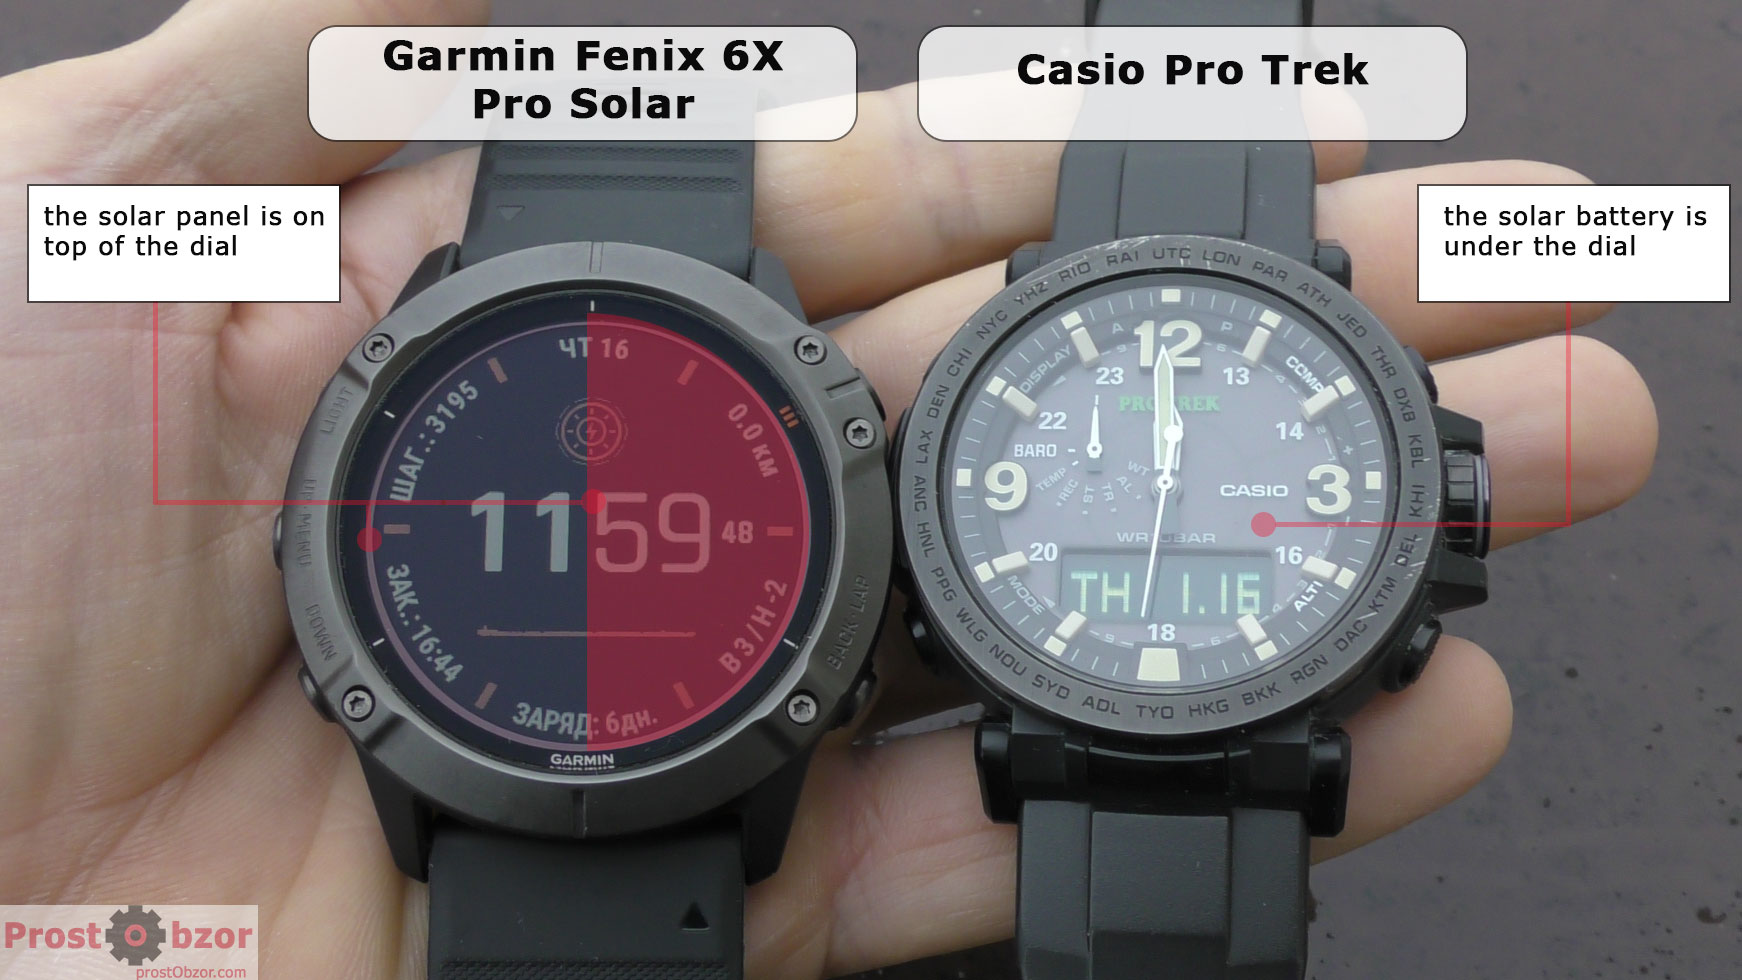 Garmin 6X Pro Solar comparison and in the detailed review